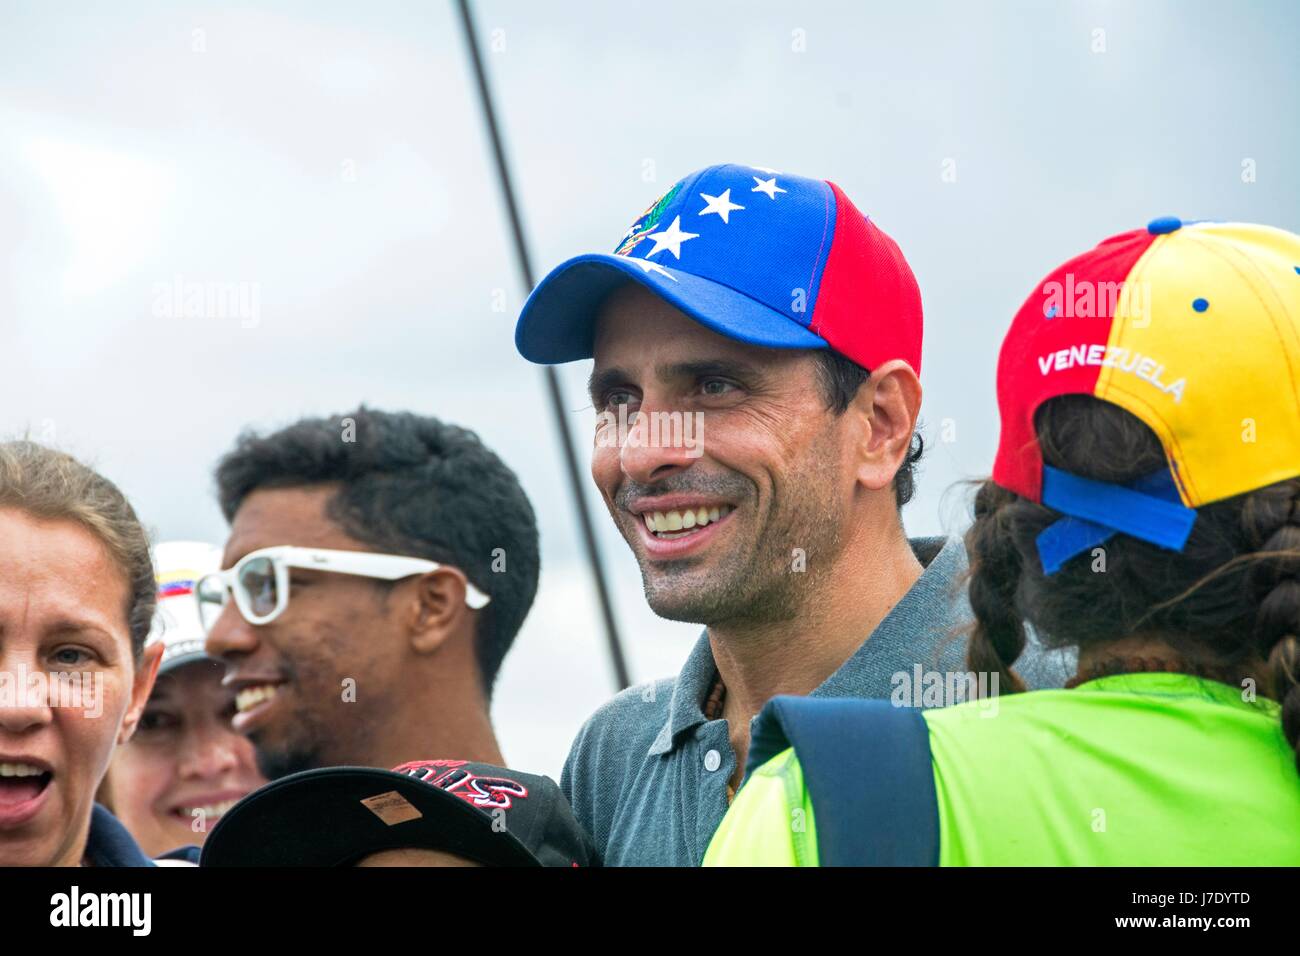 Miranda state governor and political leader Henrique Capriles Radonsky speaks to demonstrators on the freeway. Venezuelan citizens, opposed to the gov Stock Photo